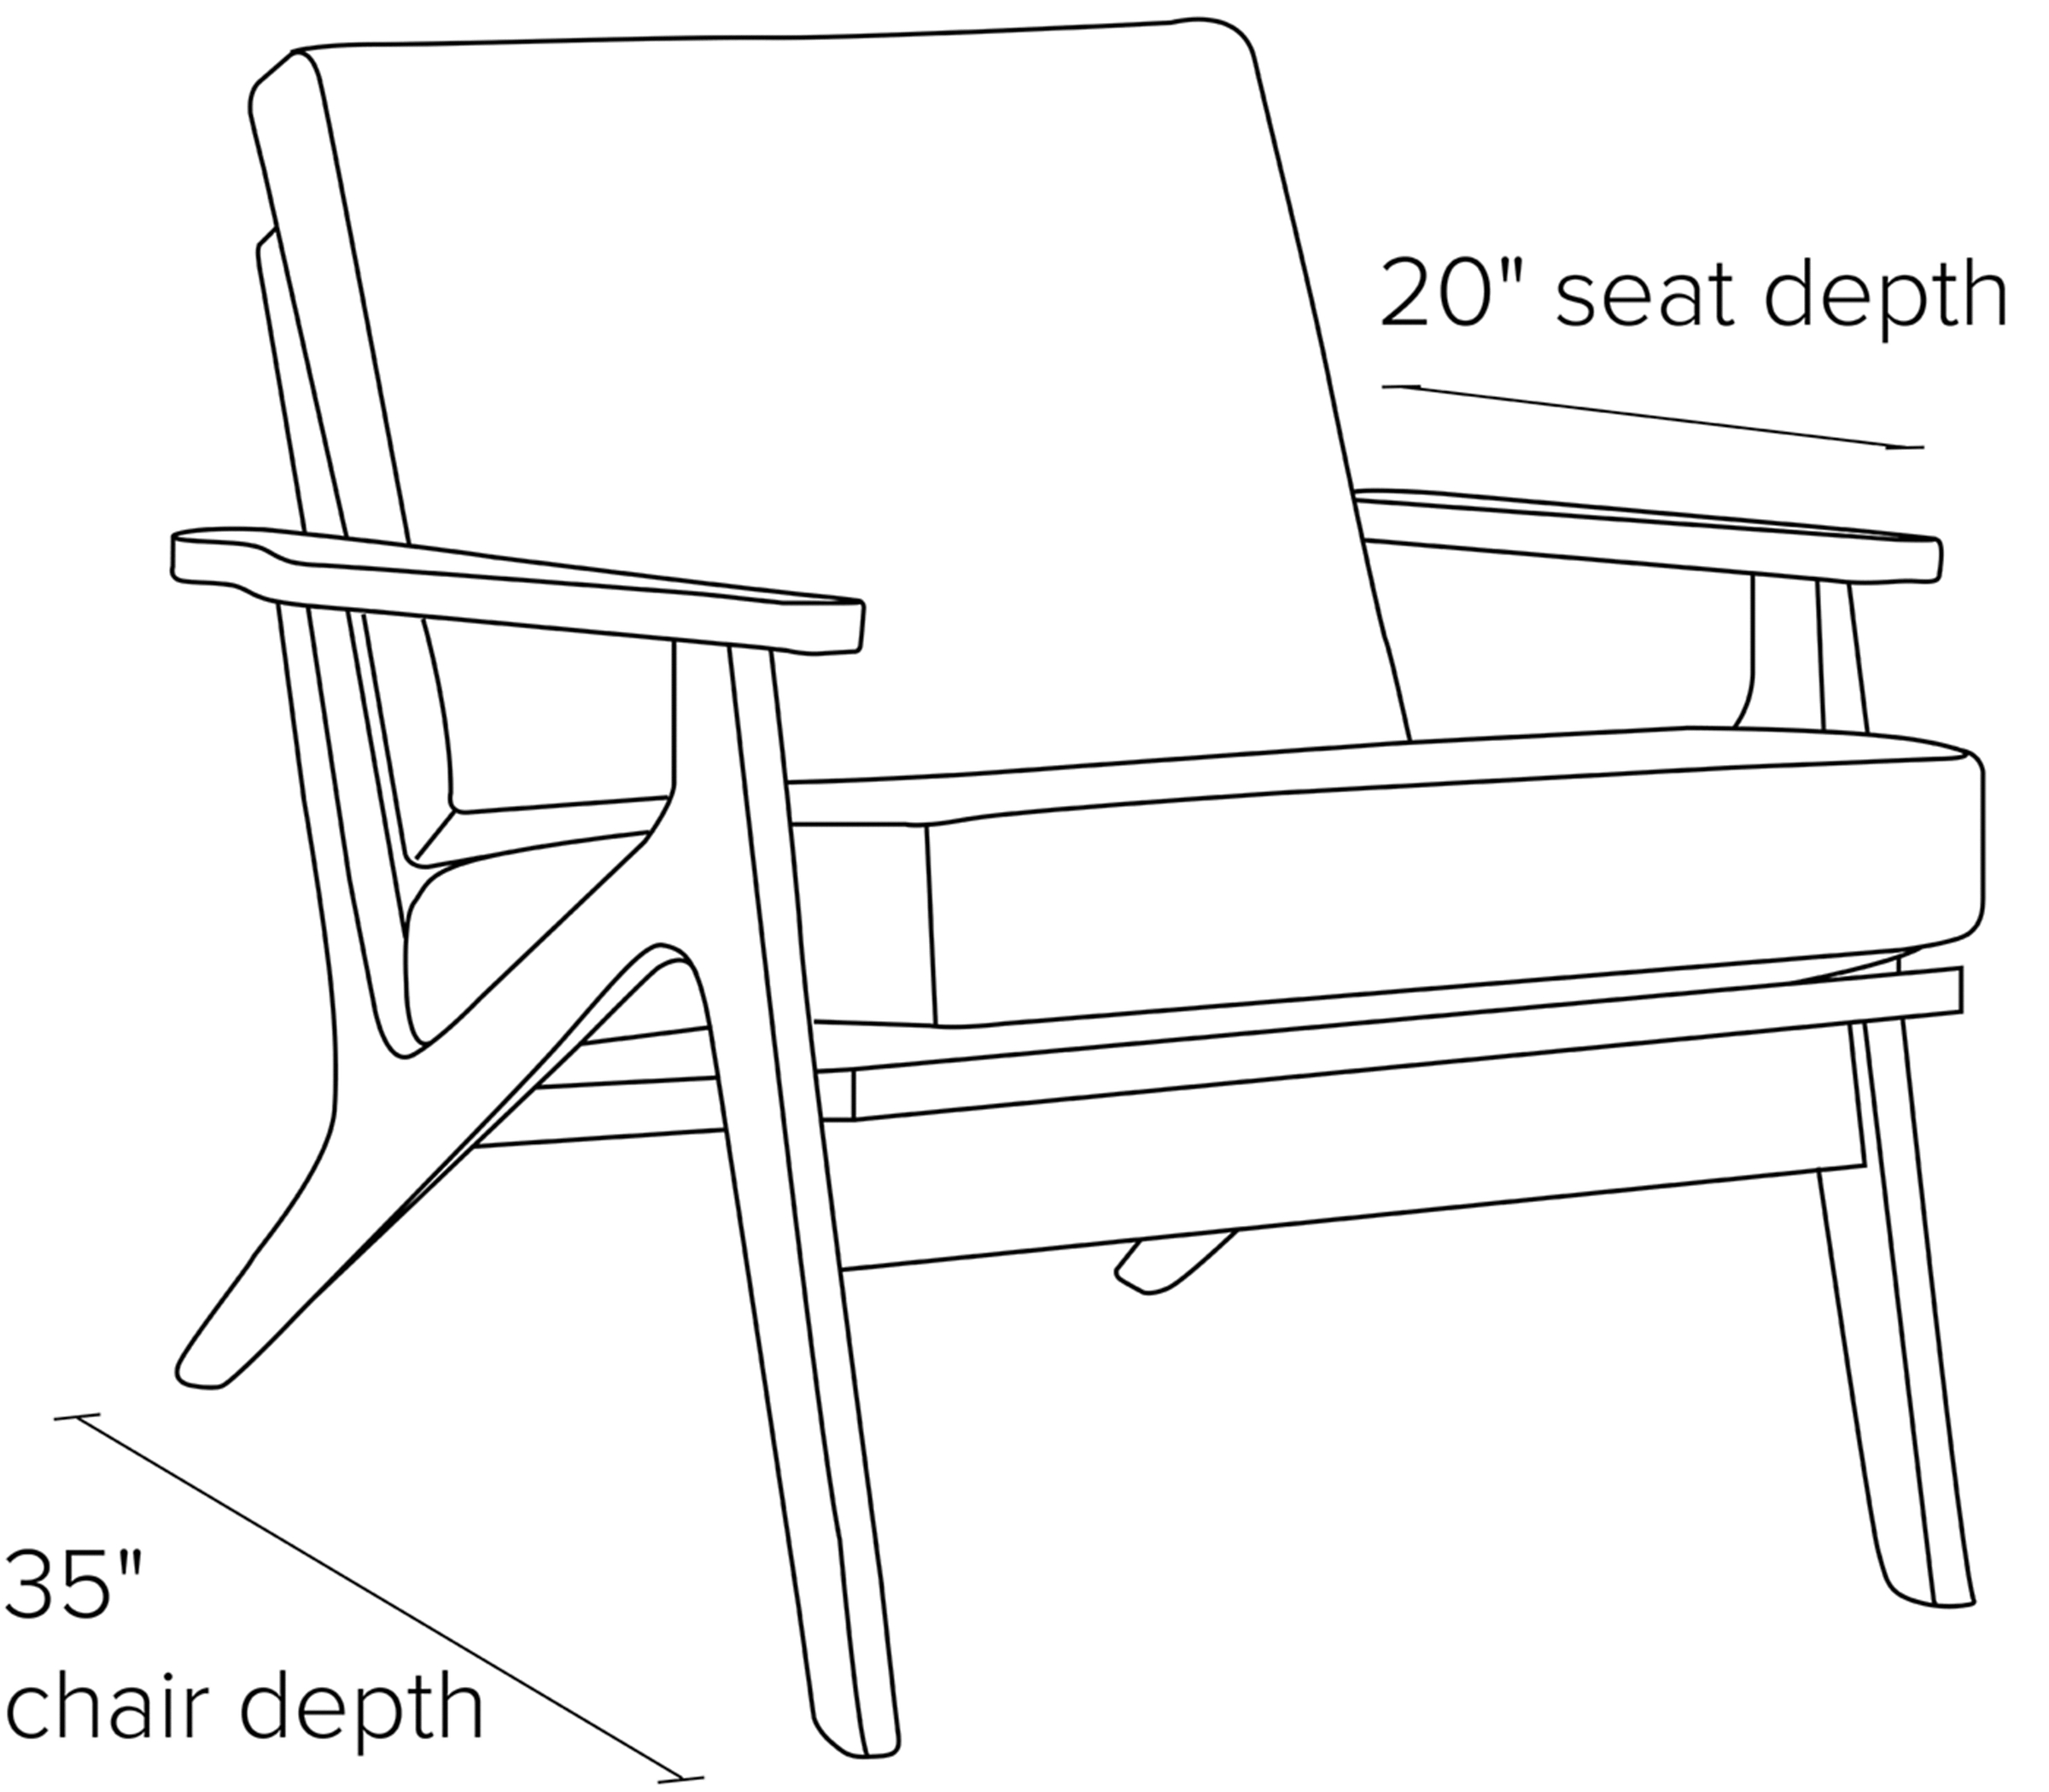 Side view dimension illustration of Sanna chair.